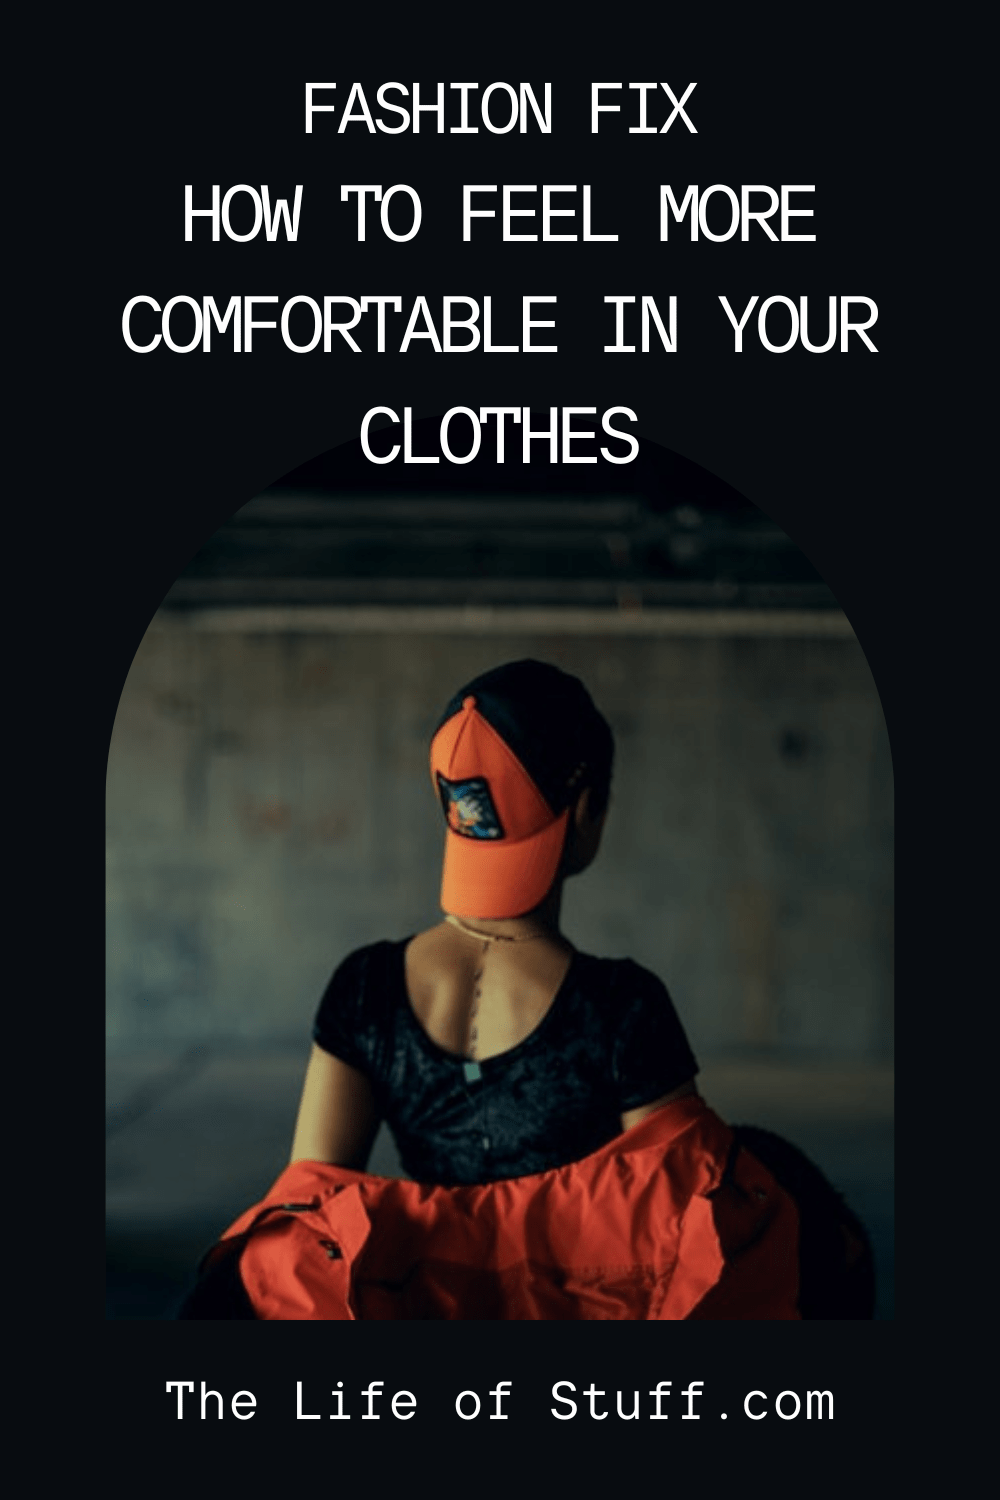 How to Feel Comfortable in Your Clothes